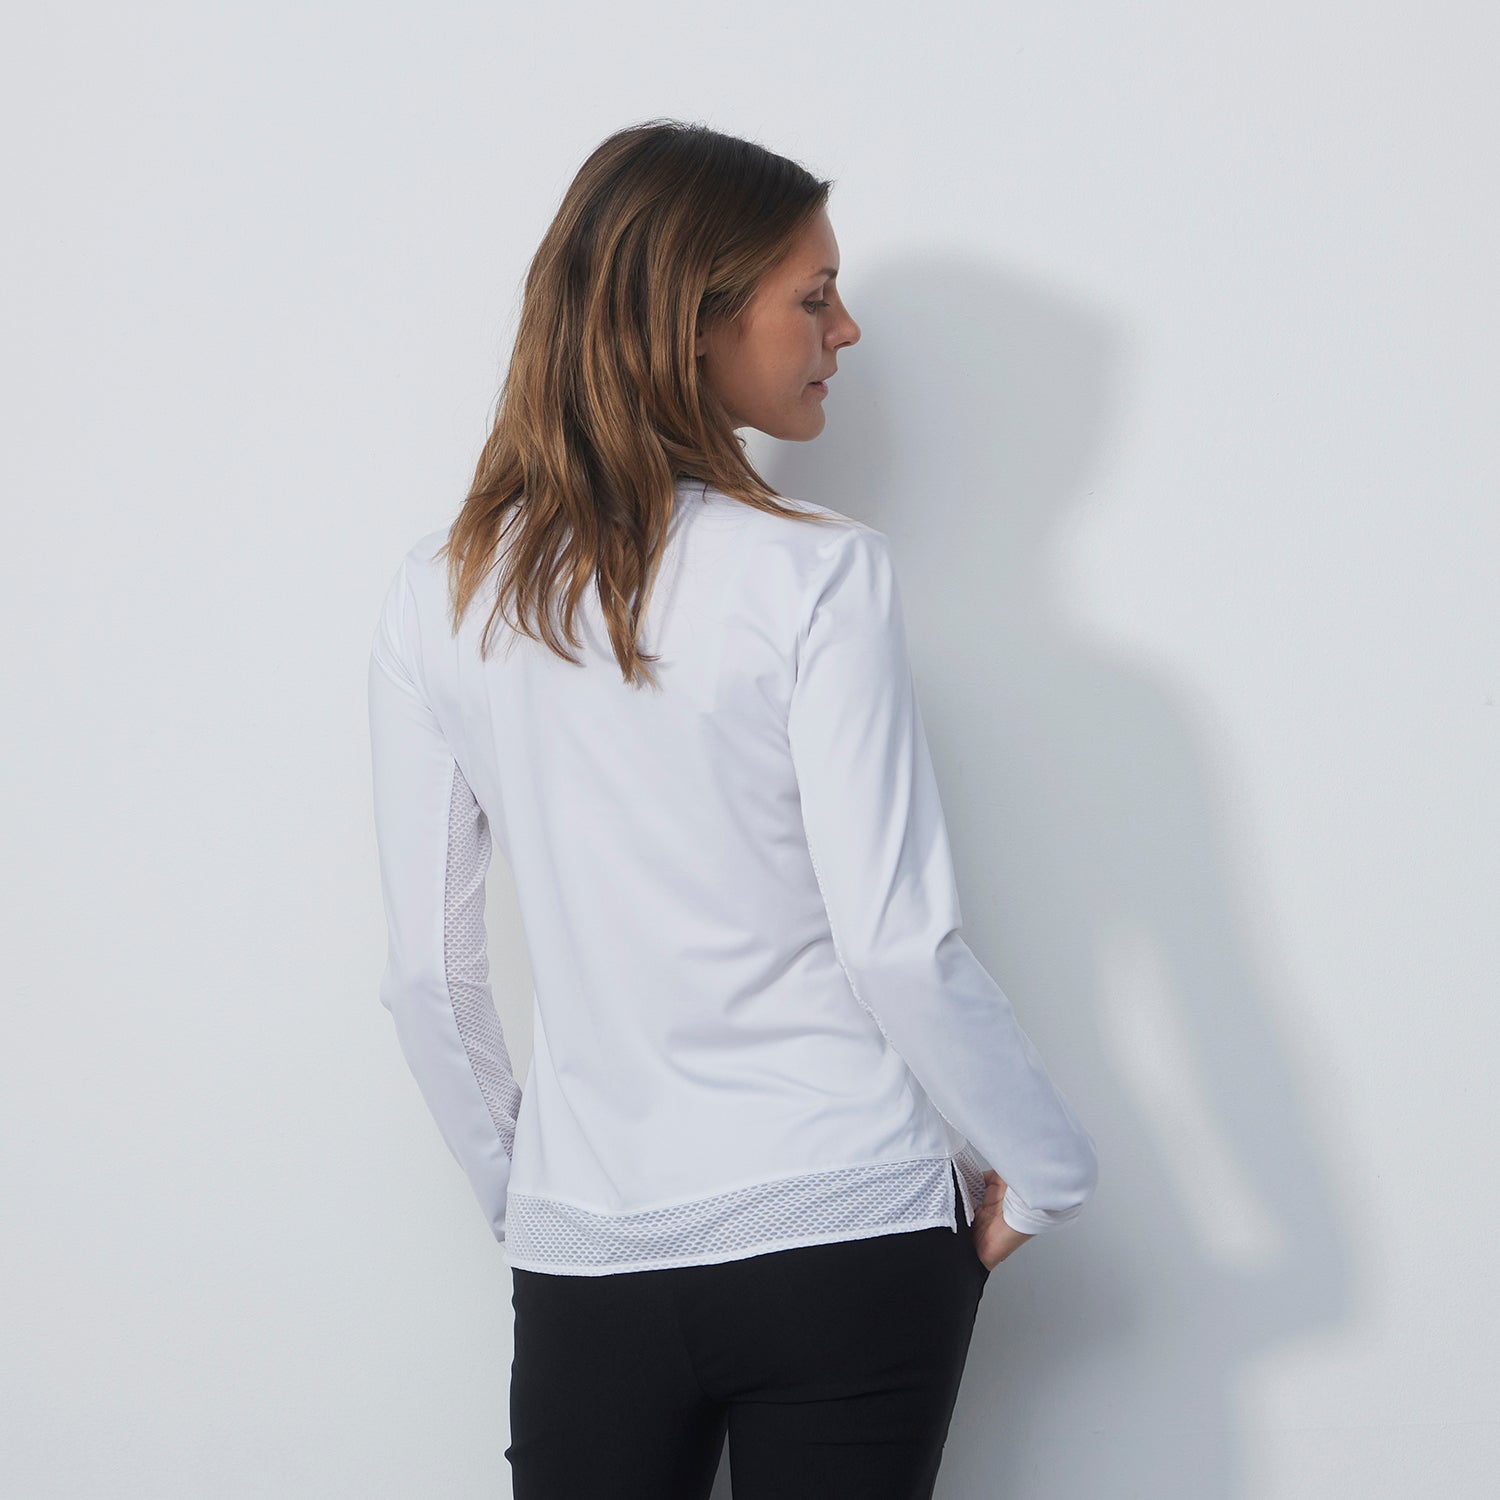 Daily Sports Ladies Classic Long Sleeve Golf Polo Shirt in White